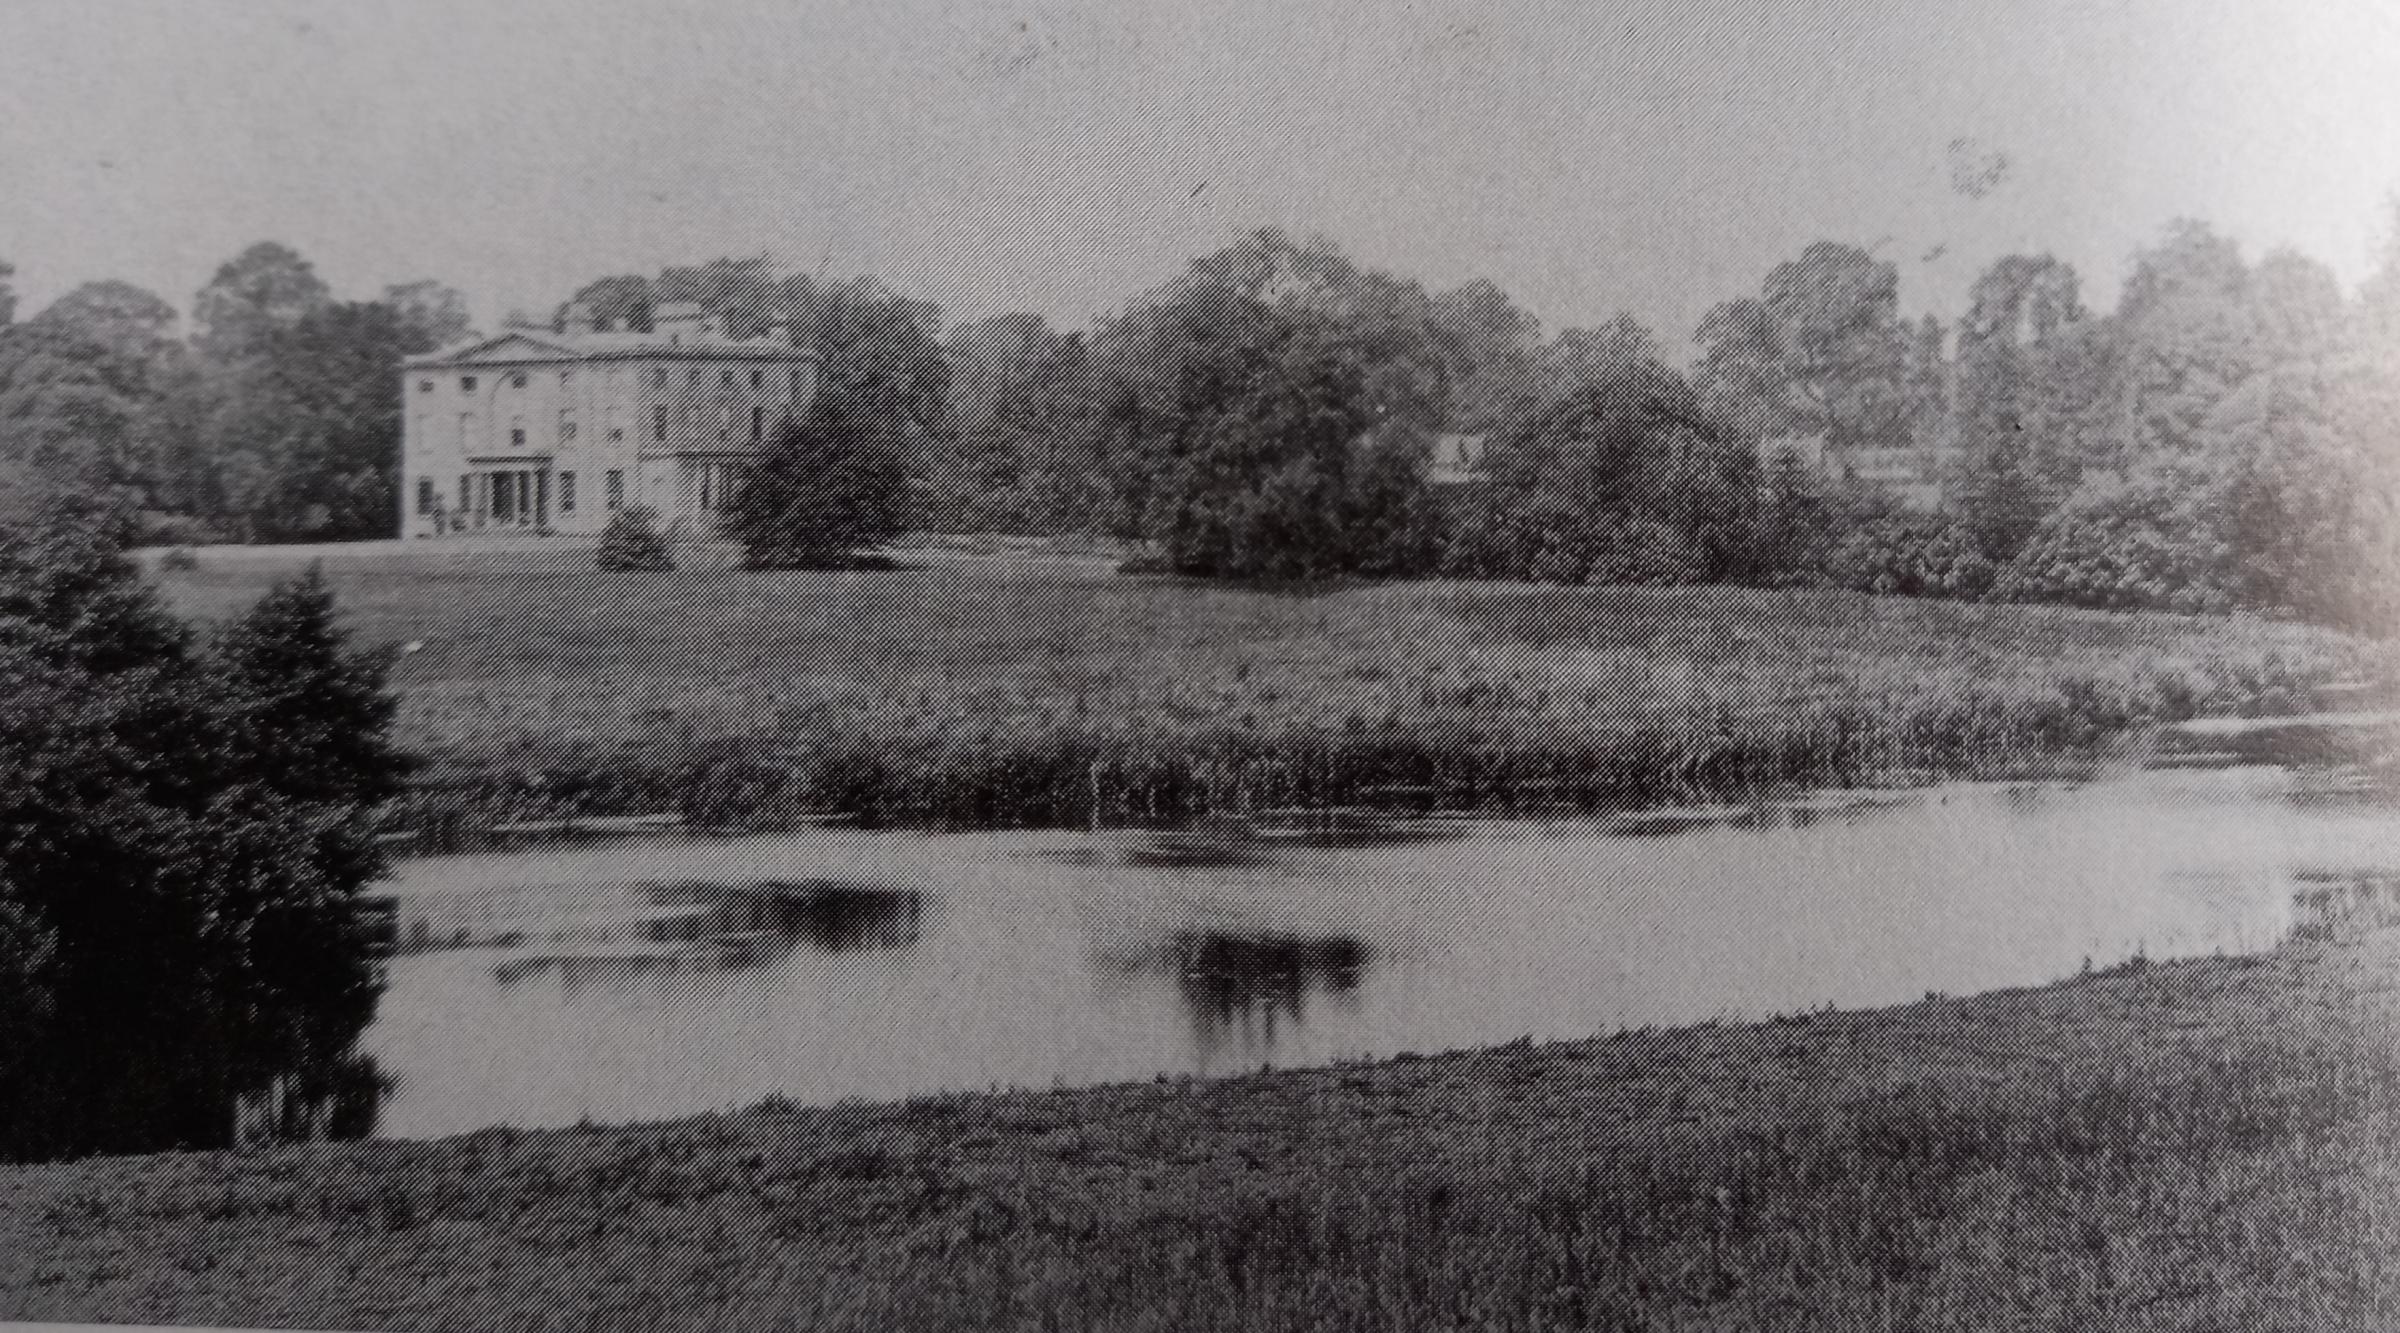 Perdiswell Hall in its 1910 hey day. Image courtesy Ray Jones’ Around Worcester in Old Photos